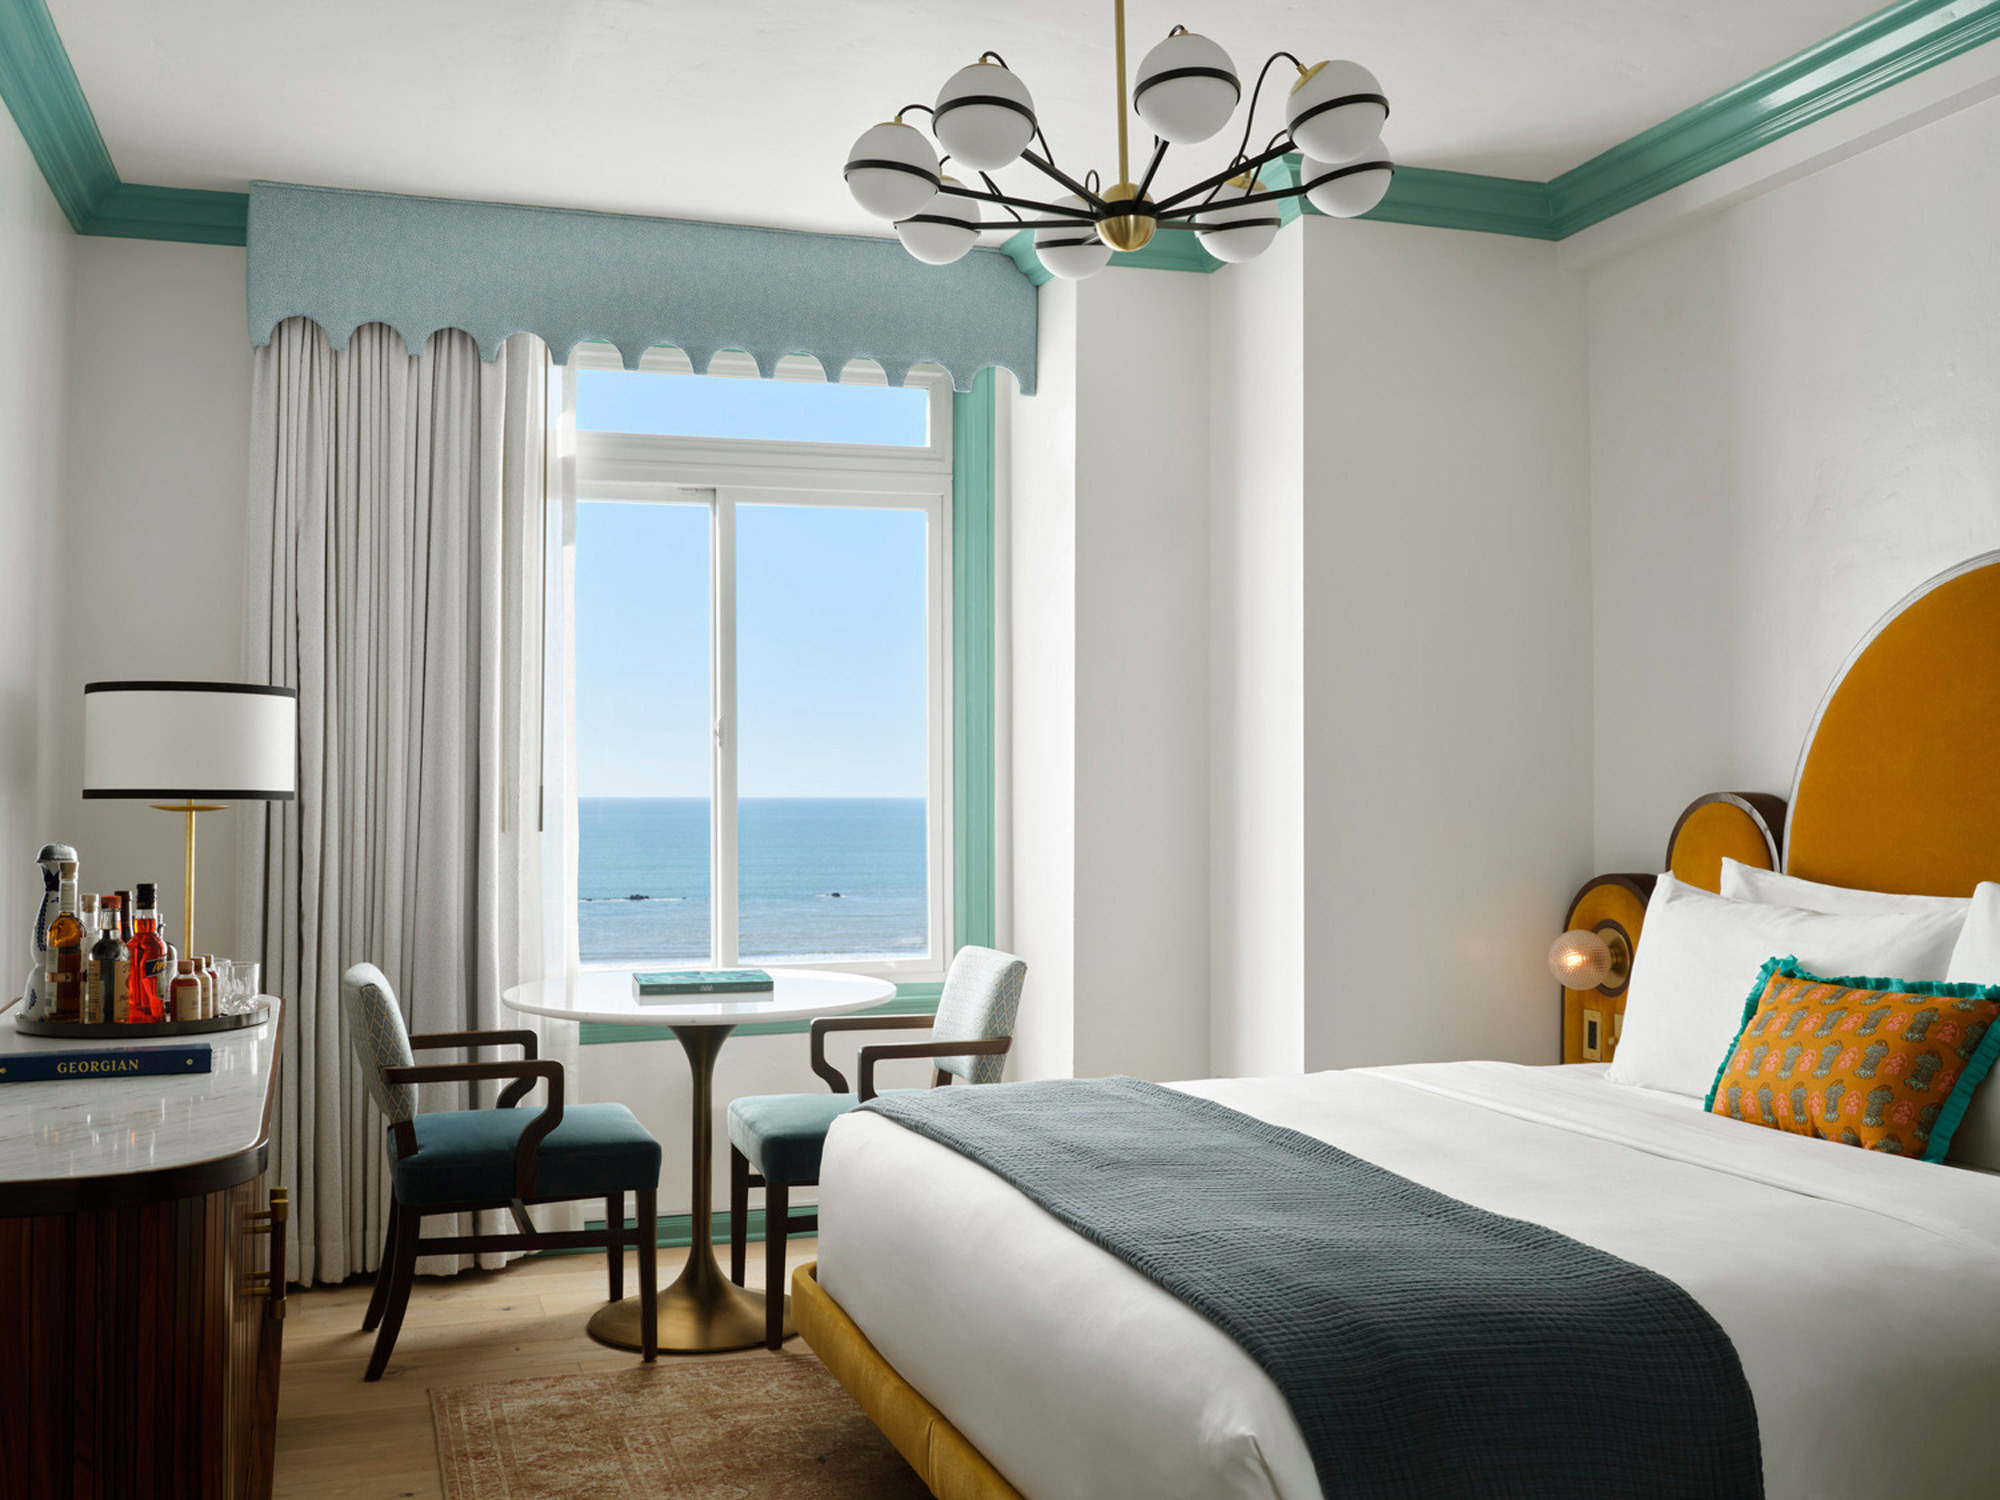 Oceanfront bedroom featuring a minimalist design with crisp white walls and a king-sized bed. Teal accents line the ceiling and window, complementing the marine view. A sculptural chandelier adds a modern touch above, while a round mirror and bespoke cabinetry offer functional elegance.